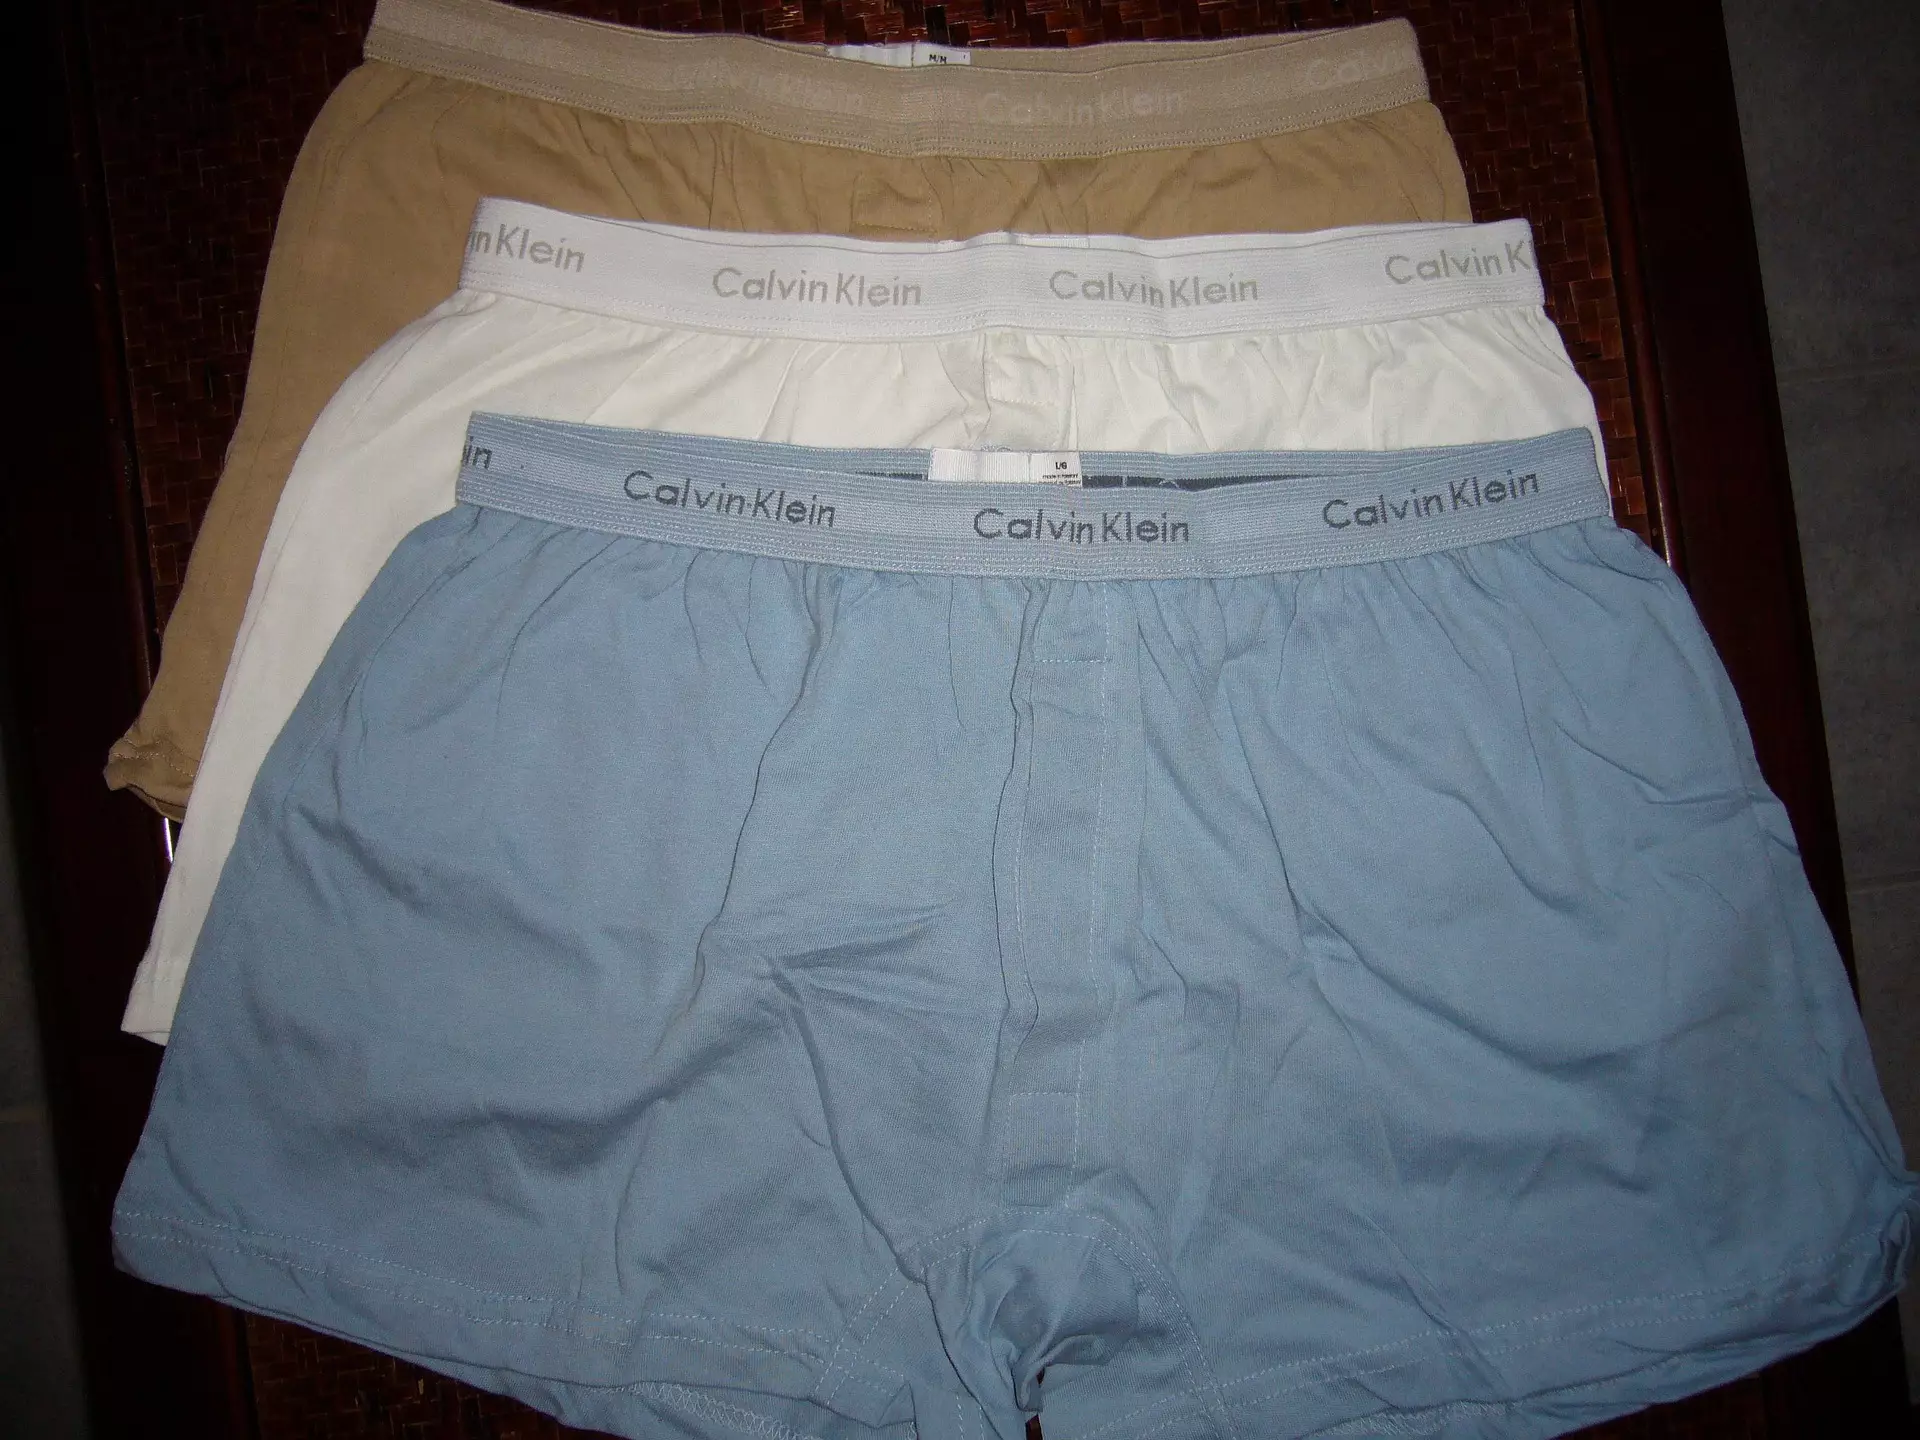 If you call trousers pants, what do you call underwear? - Quora